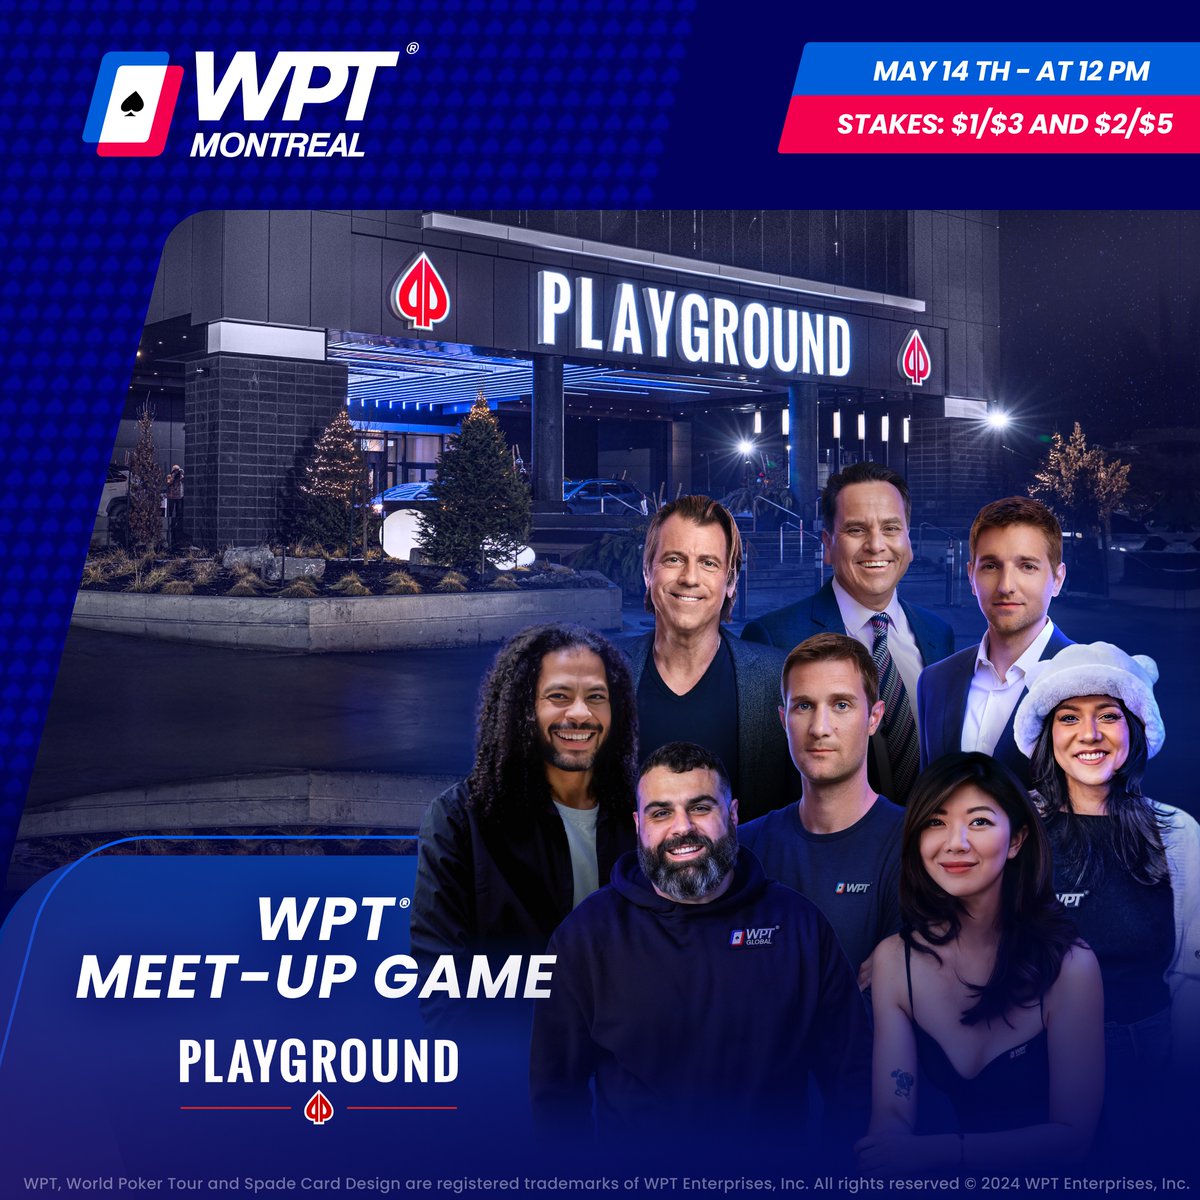 🇨🇦 #WPTMUG ANNOUNCEMENT 🇨🇦 @WPT returns to @PlaygroundPoker from May 9-22 for a festival chalk full of events, including a @WPT Meet-Up Game taking place May 14 with @WPT talent, @wpt_global ambassadors, and poker personalities! @VinceVanP_WPT @SavagePoker @tonydunsttv…